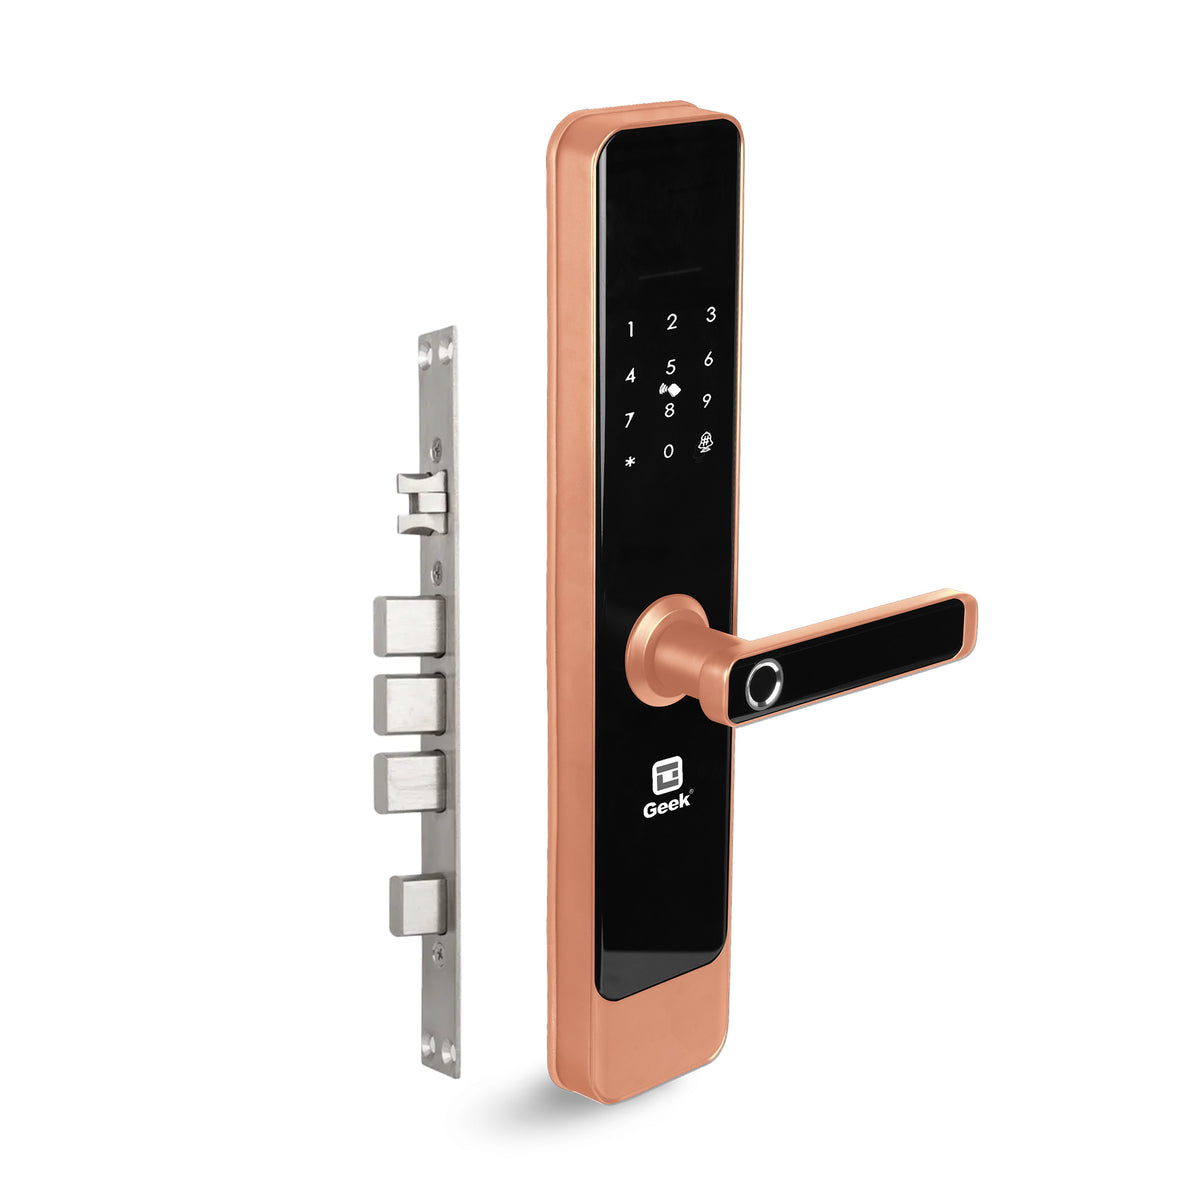 Geek E908 Wi-Fi Enabled 5-in-1 Smart Digital Door Lock With 5 Locking Bolts, App Support and Biometric Fingerprint Access (Rose Gold)